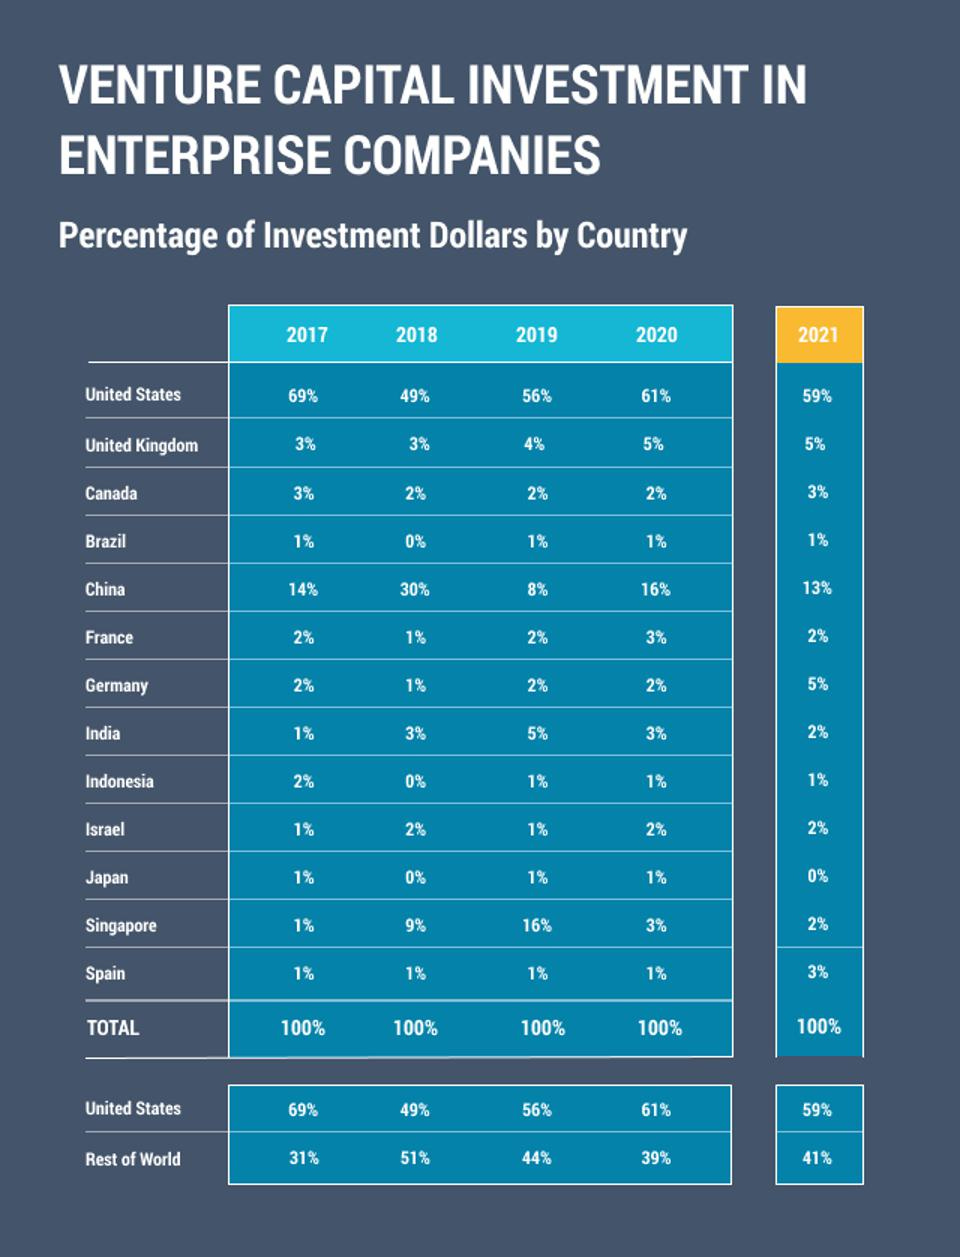 Venture Capital Investment in Enterprise Companies by Country